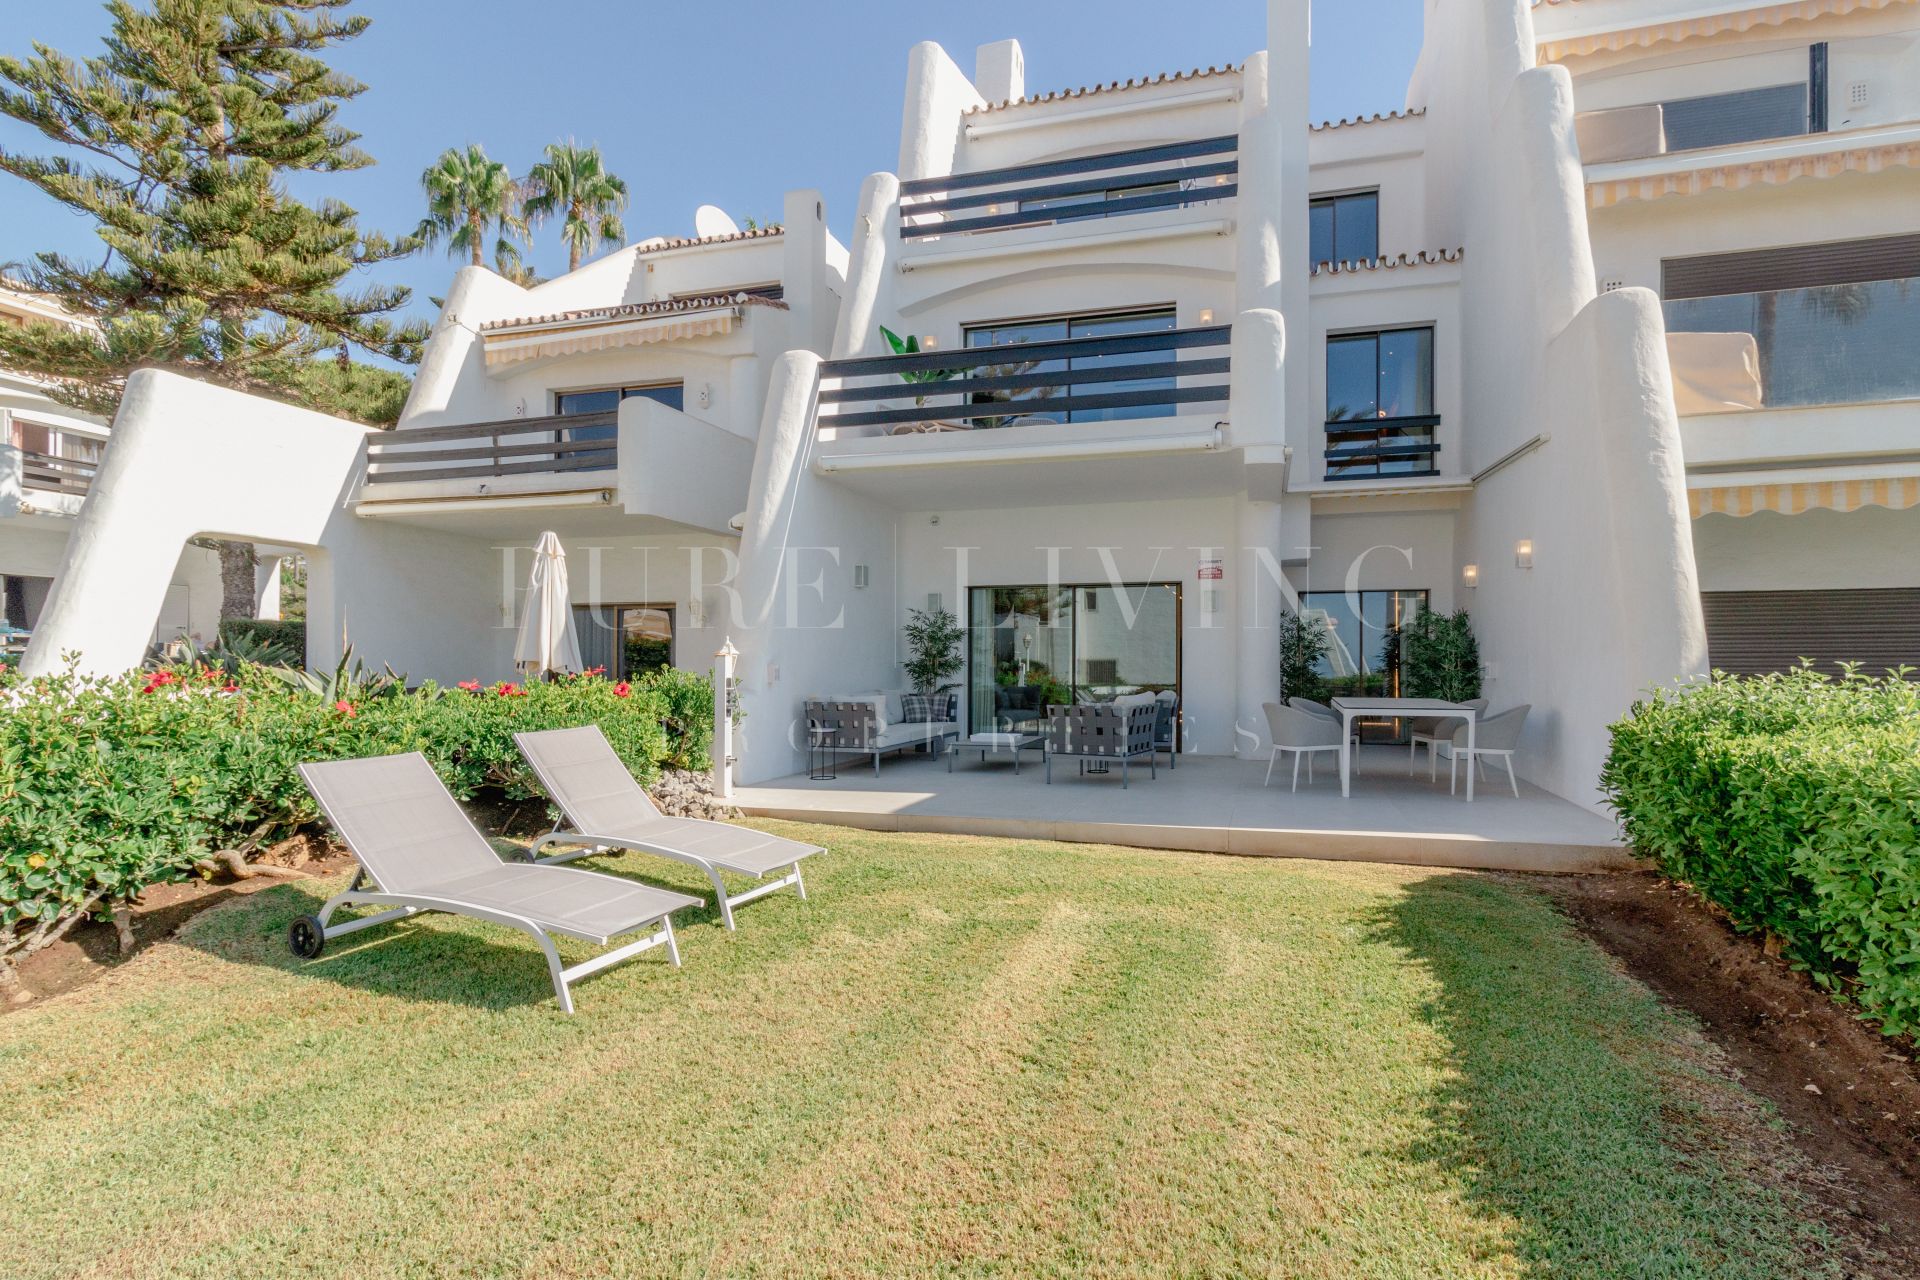 A newly renovated four bedroom townhouse in Coral Beach